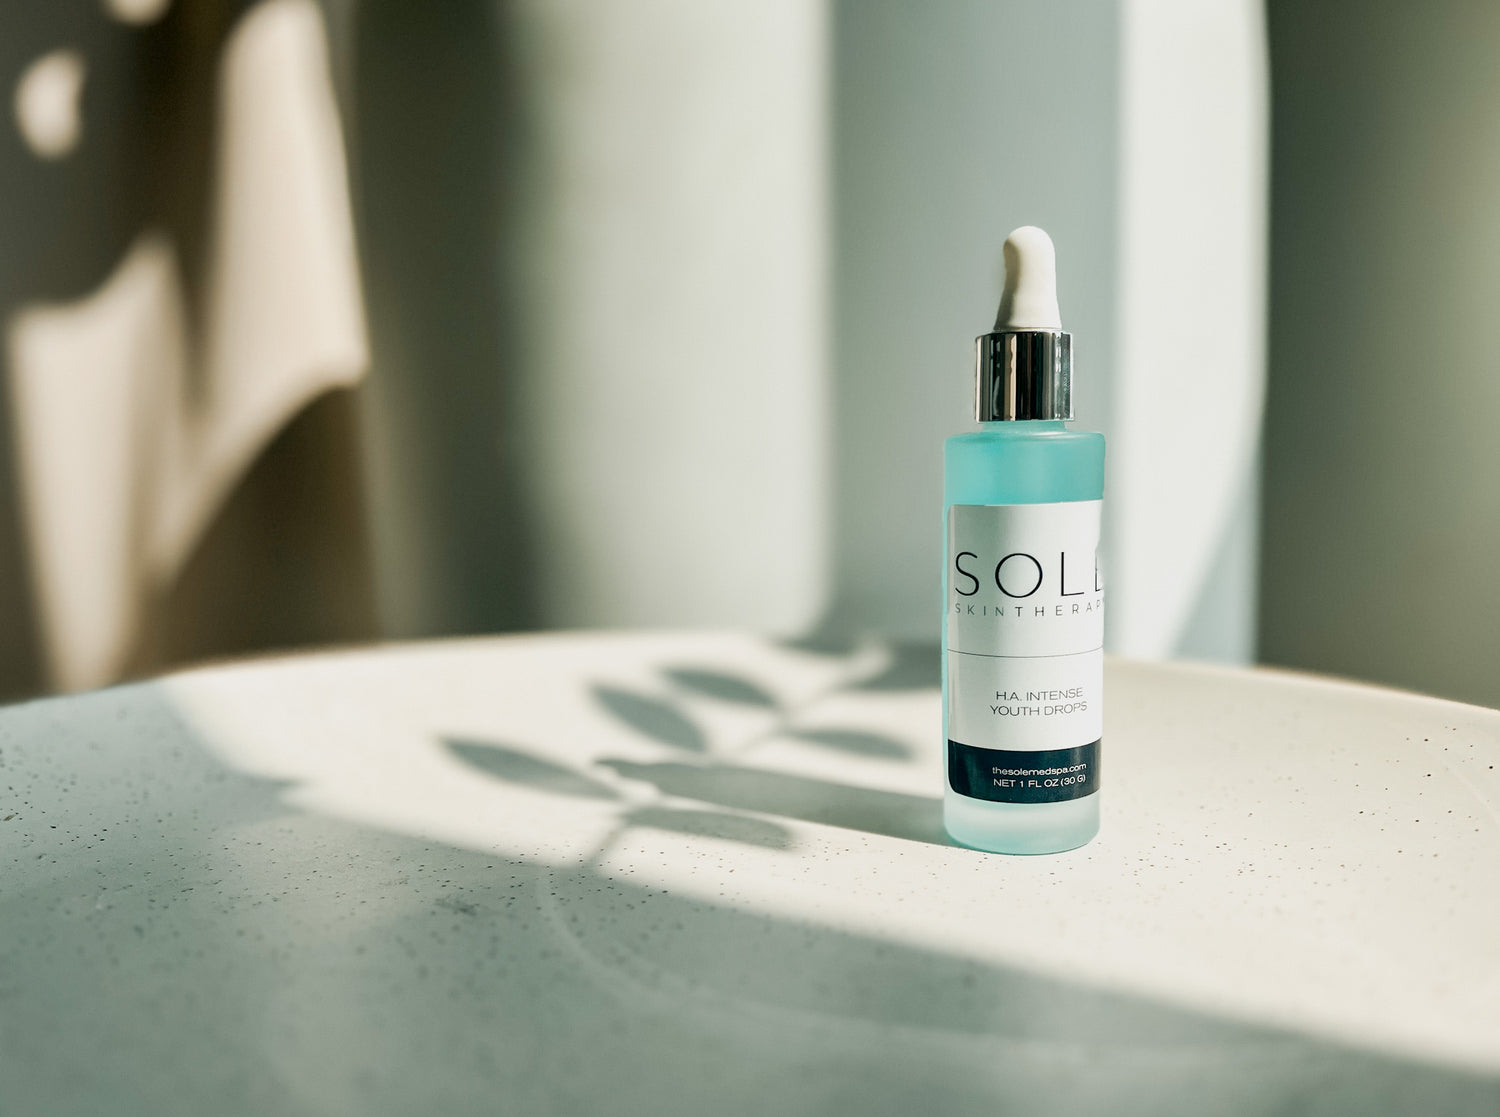 Solé H.A. Intense Youth Drops